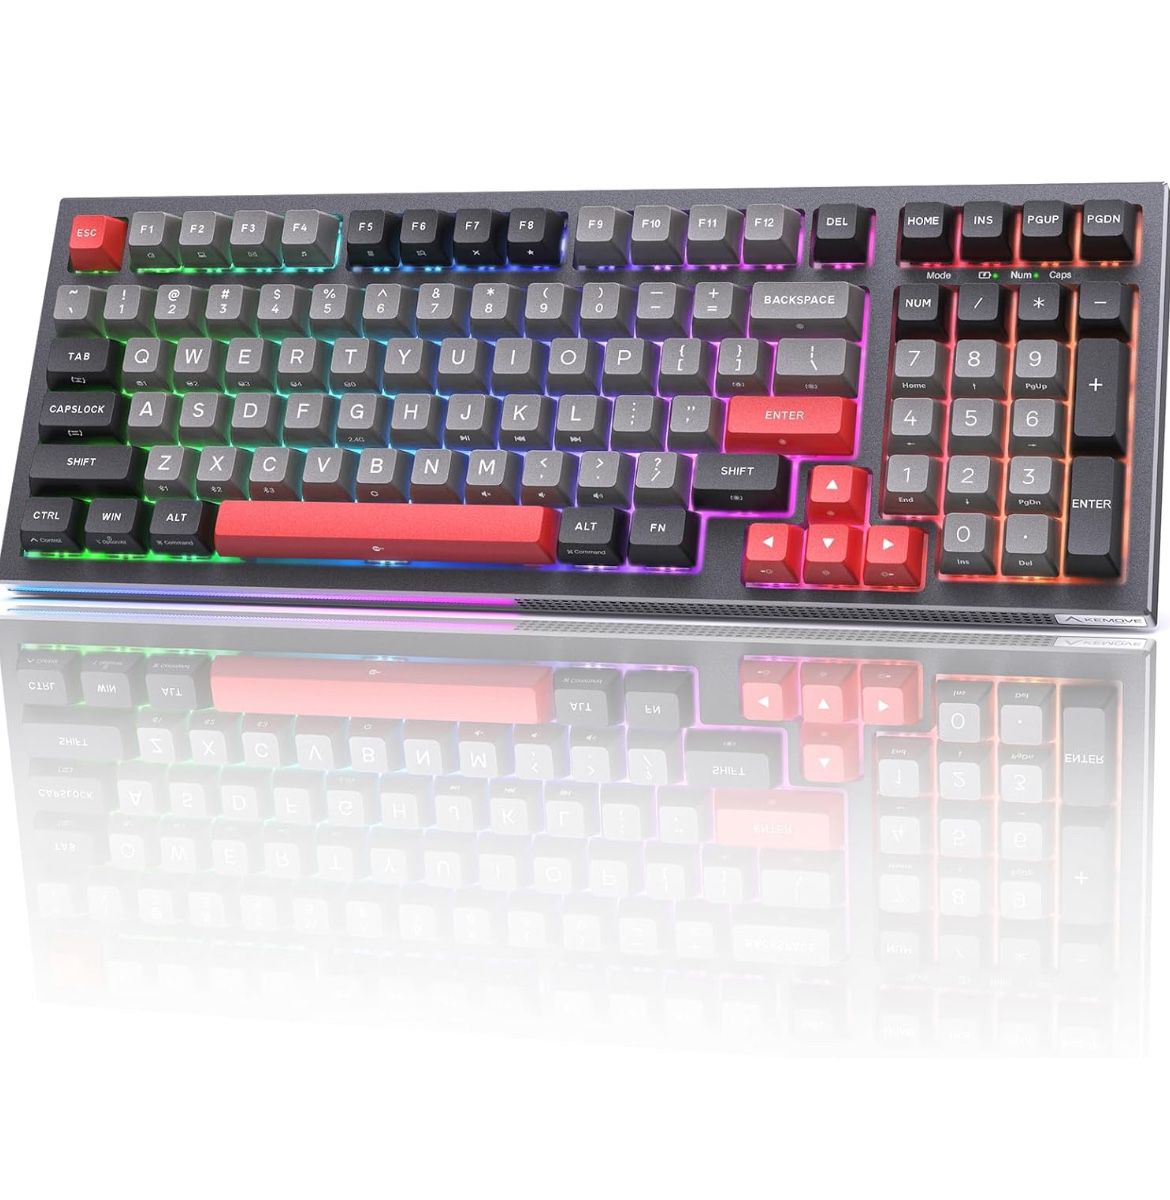 KEMOVE K98 Wireless Gaming Mechanical Keyboard with BT5.0/2.4G/Type-C,RGB Backlight,98 Keys Hot-Swappable,4000mAh Massive Battery,Software Support,Dia